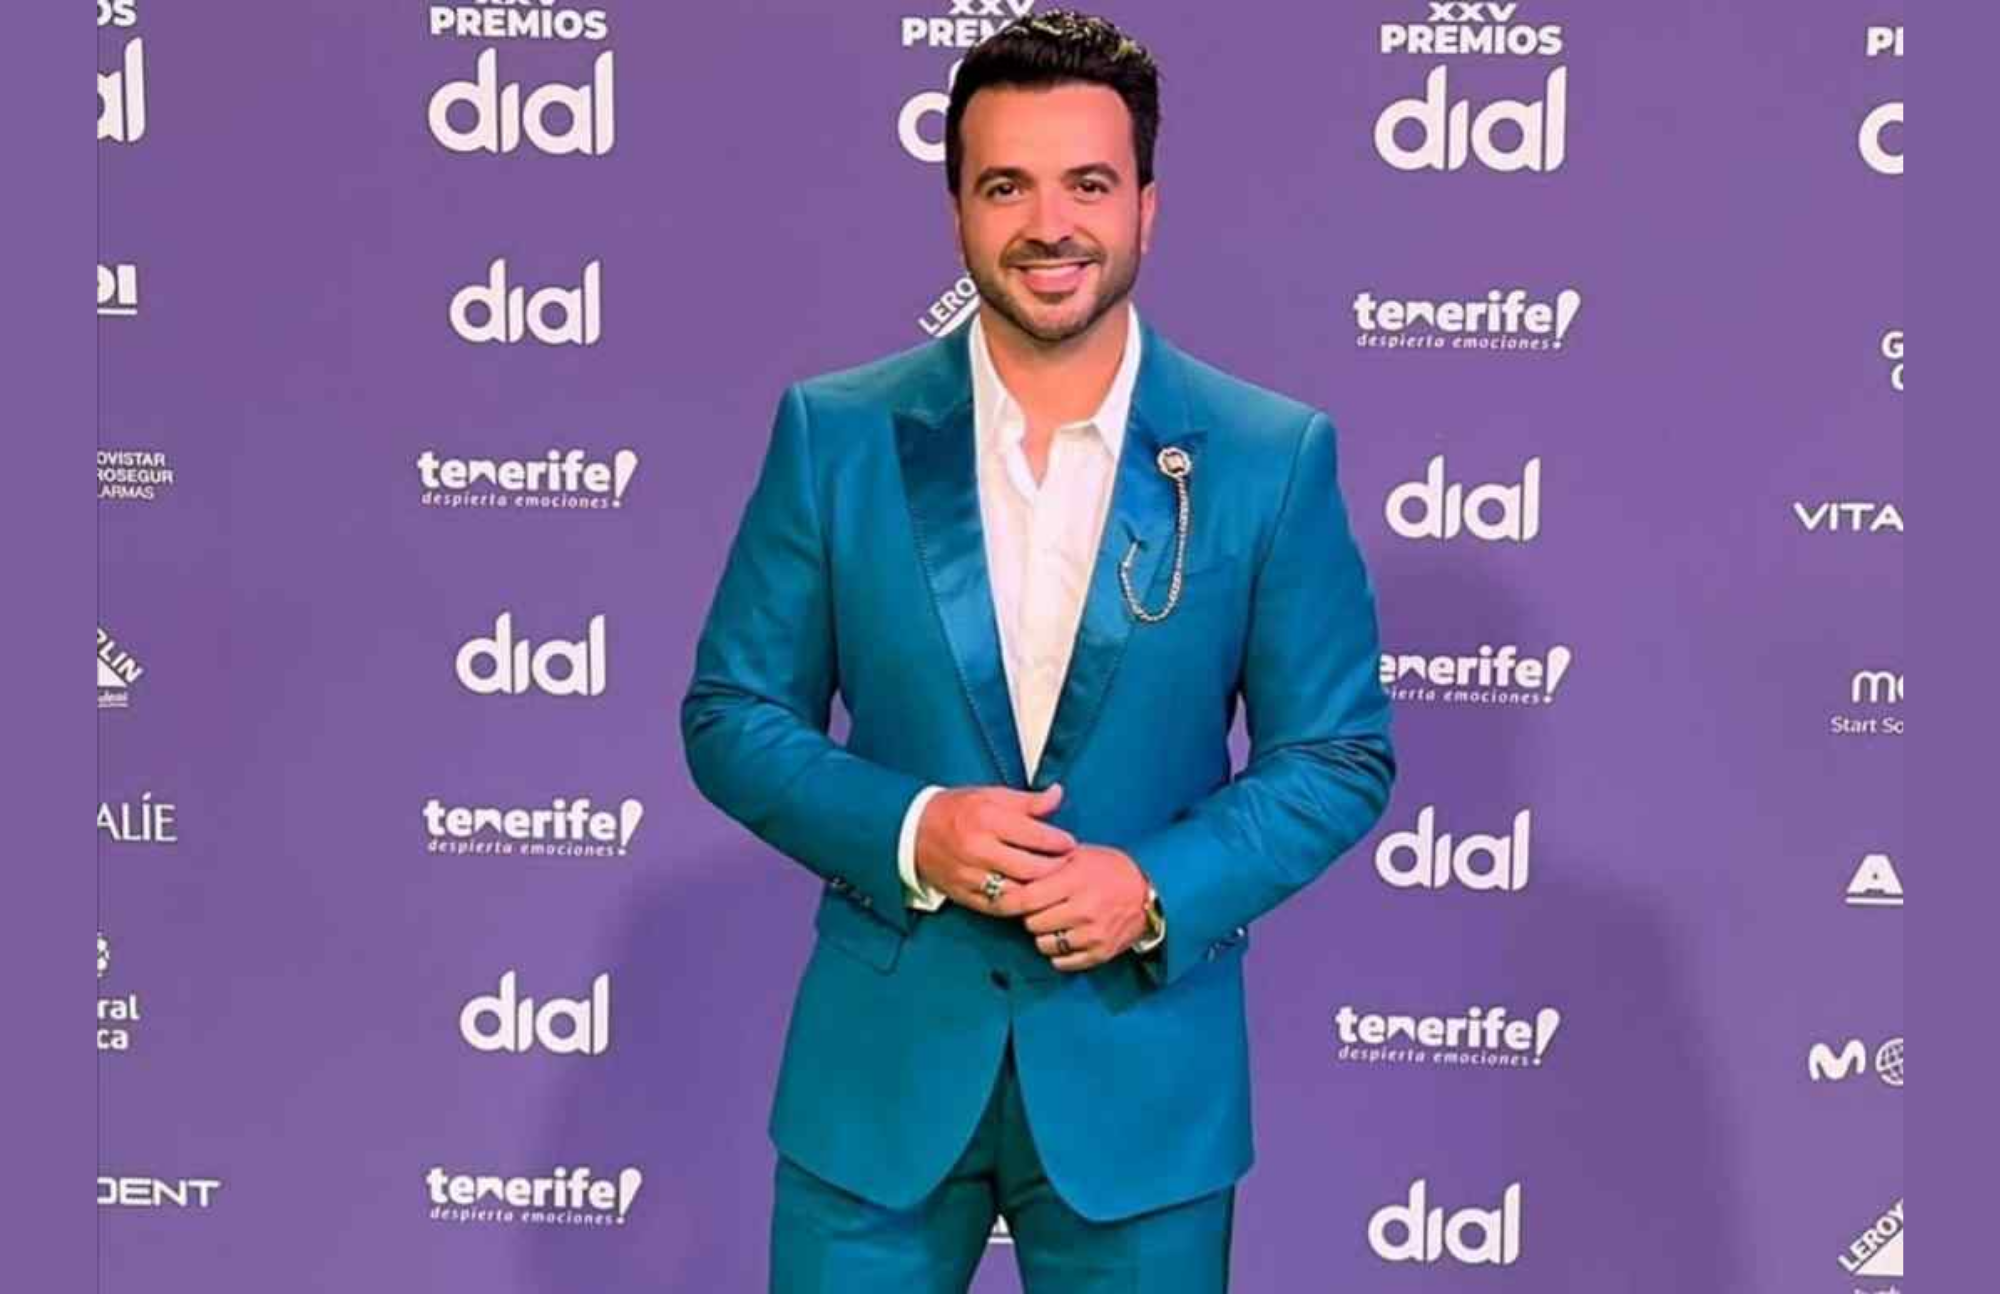 Luis Fonsi at an event in his blue coat and pants